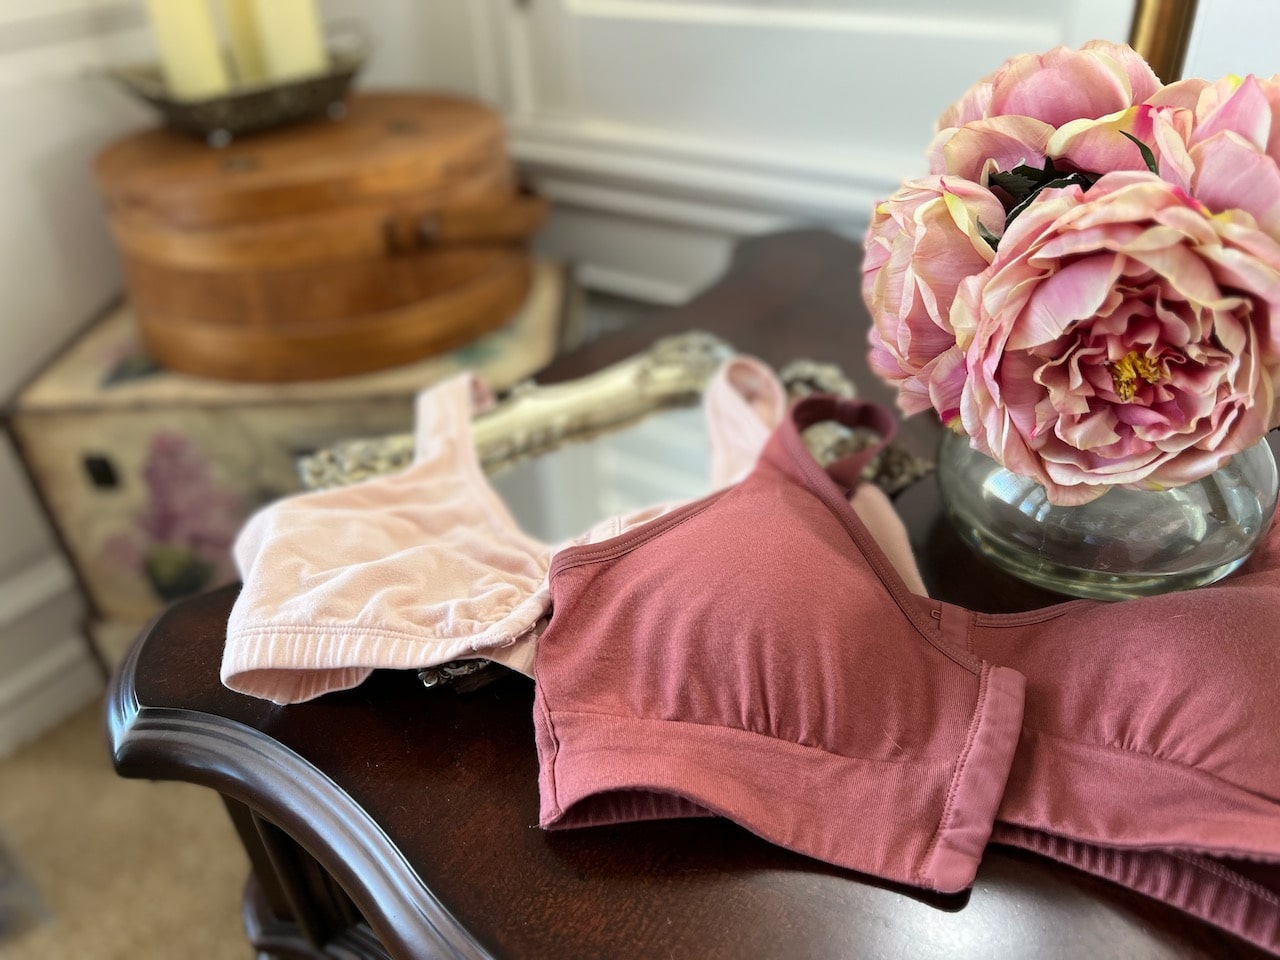 Lumpectomy, Bras and Inserts: What You Should Know for Insurance